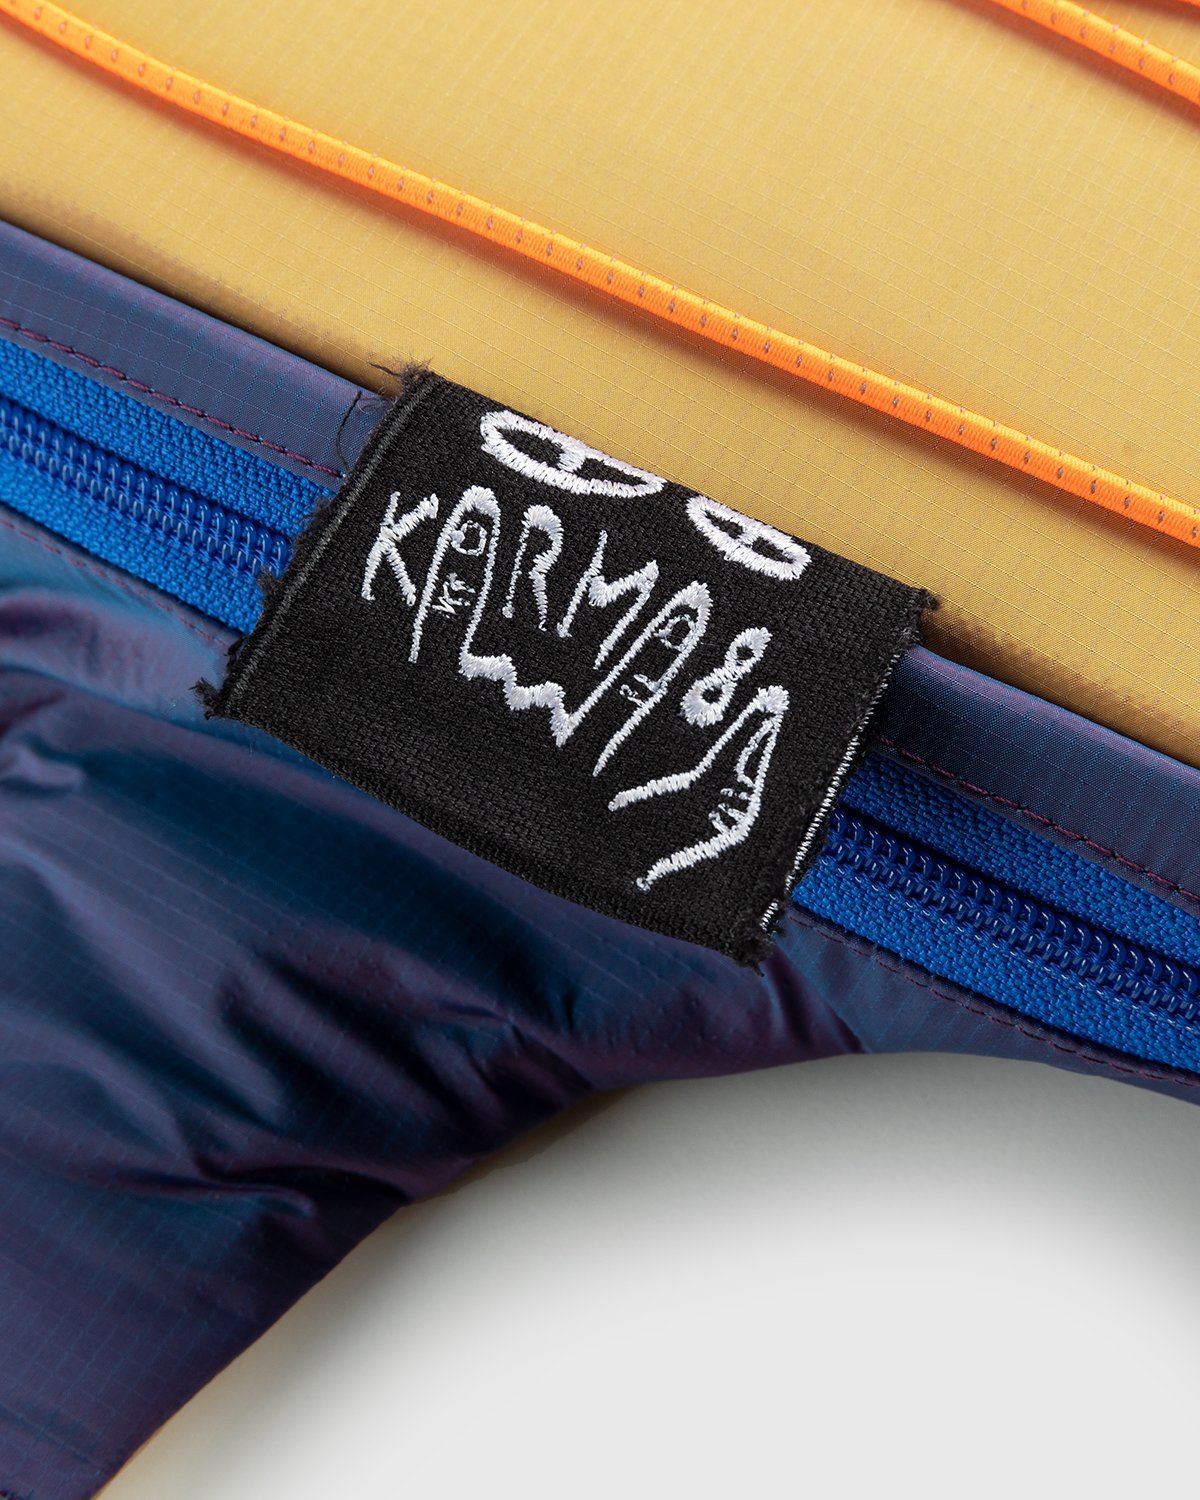 KARMA8A x Highsnobiety - HS Sports Alt Backpack Gold - Accessories - Gold - Image 5